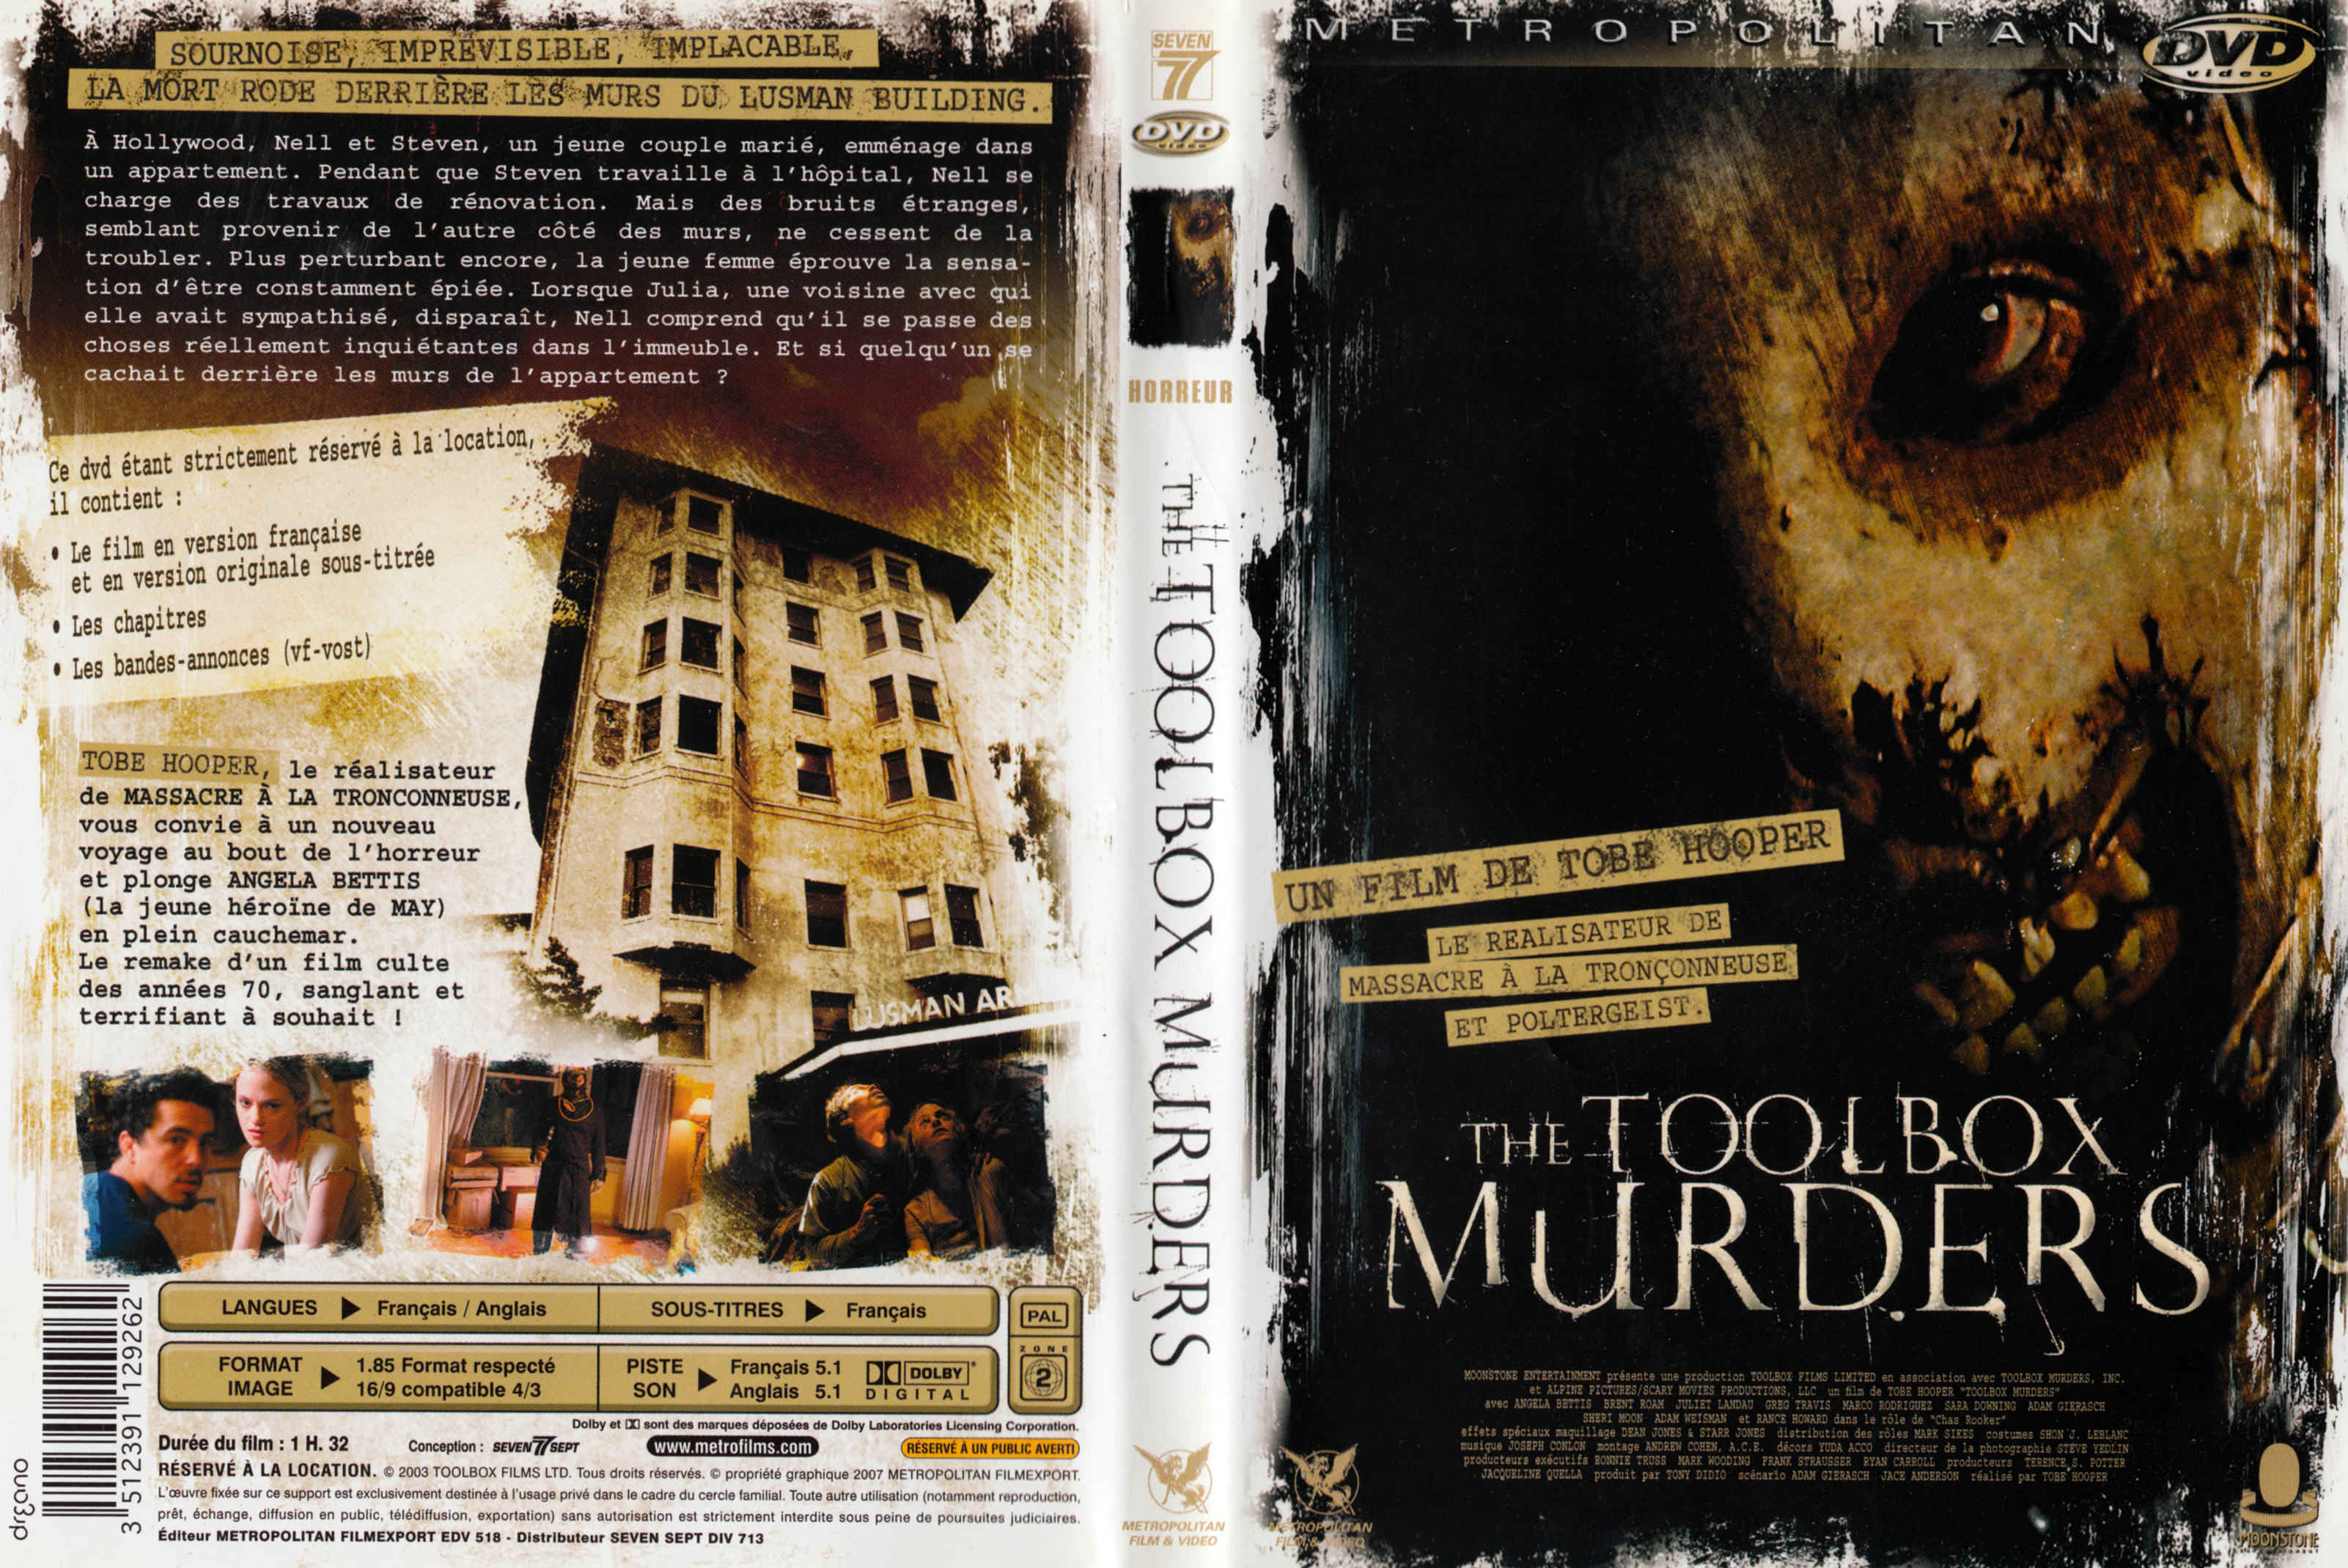 Jaquette DVD The toolbox murders